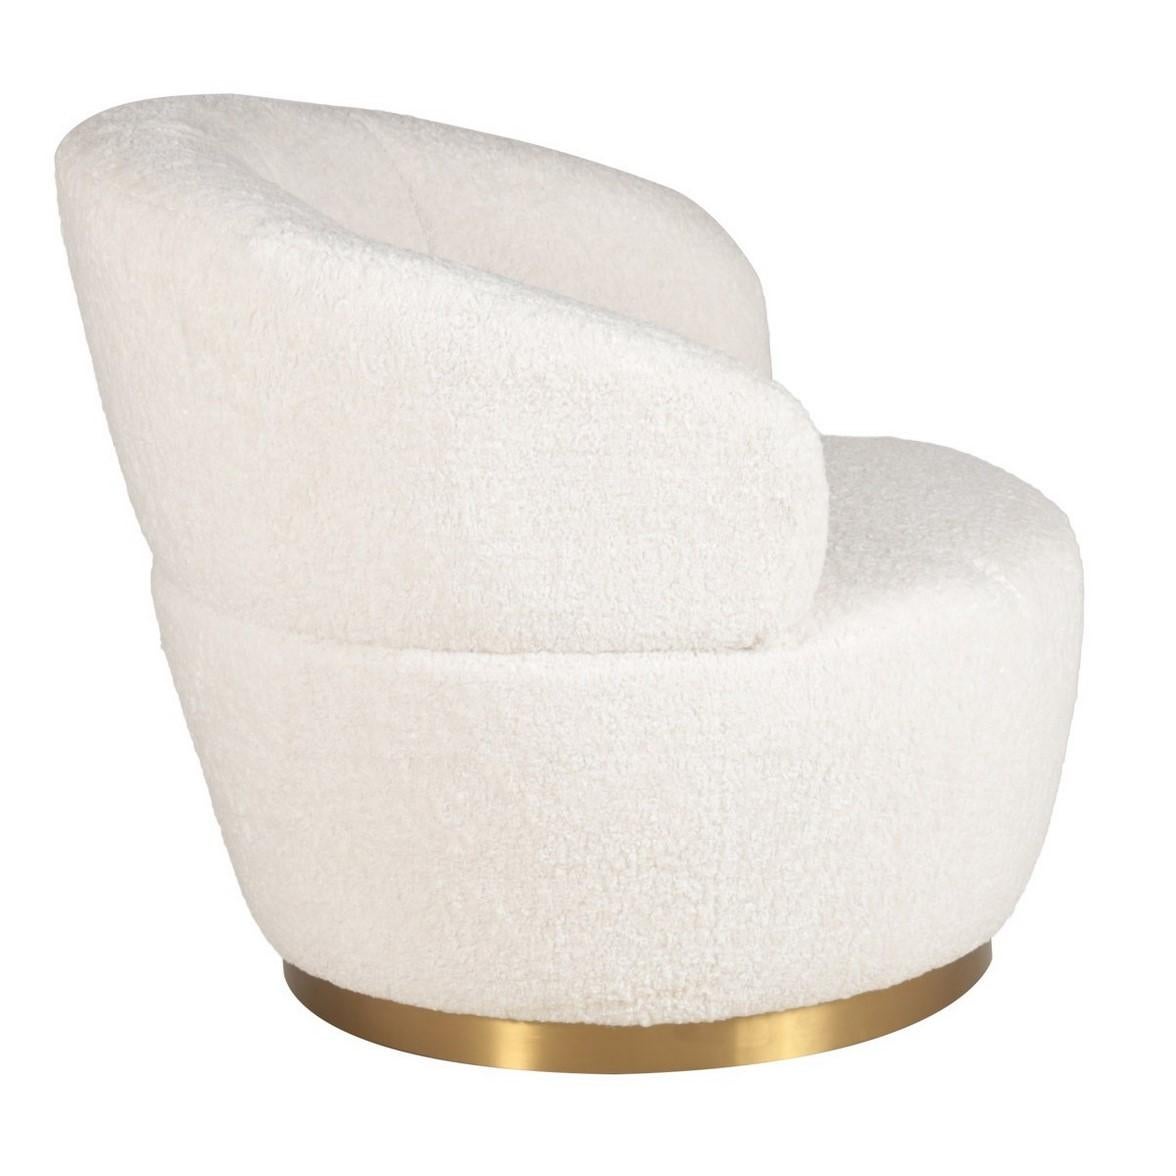 Beige bouclé mohair effect fabric with gold touch welcoming, round and comfy armchair in Art Deco style.